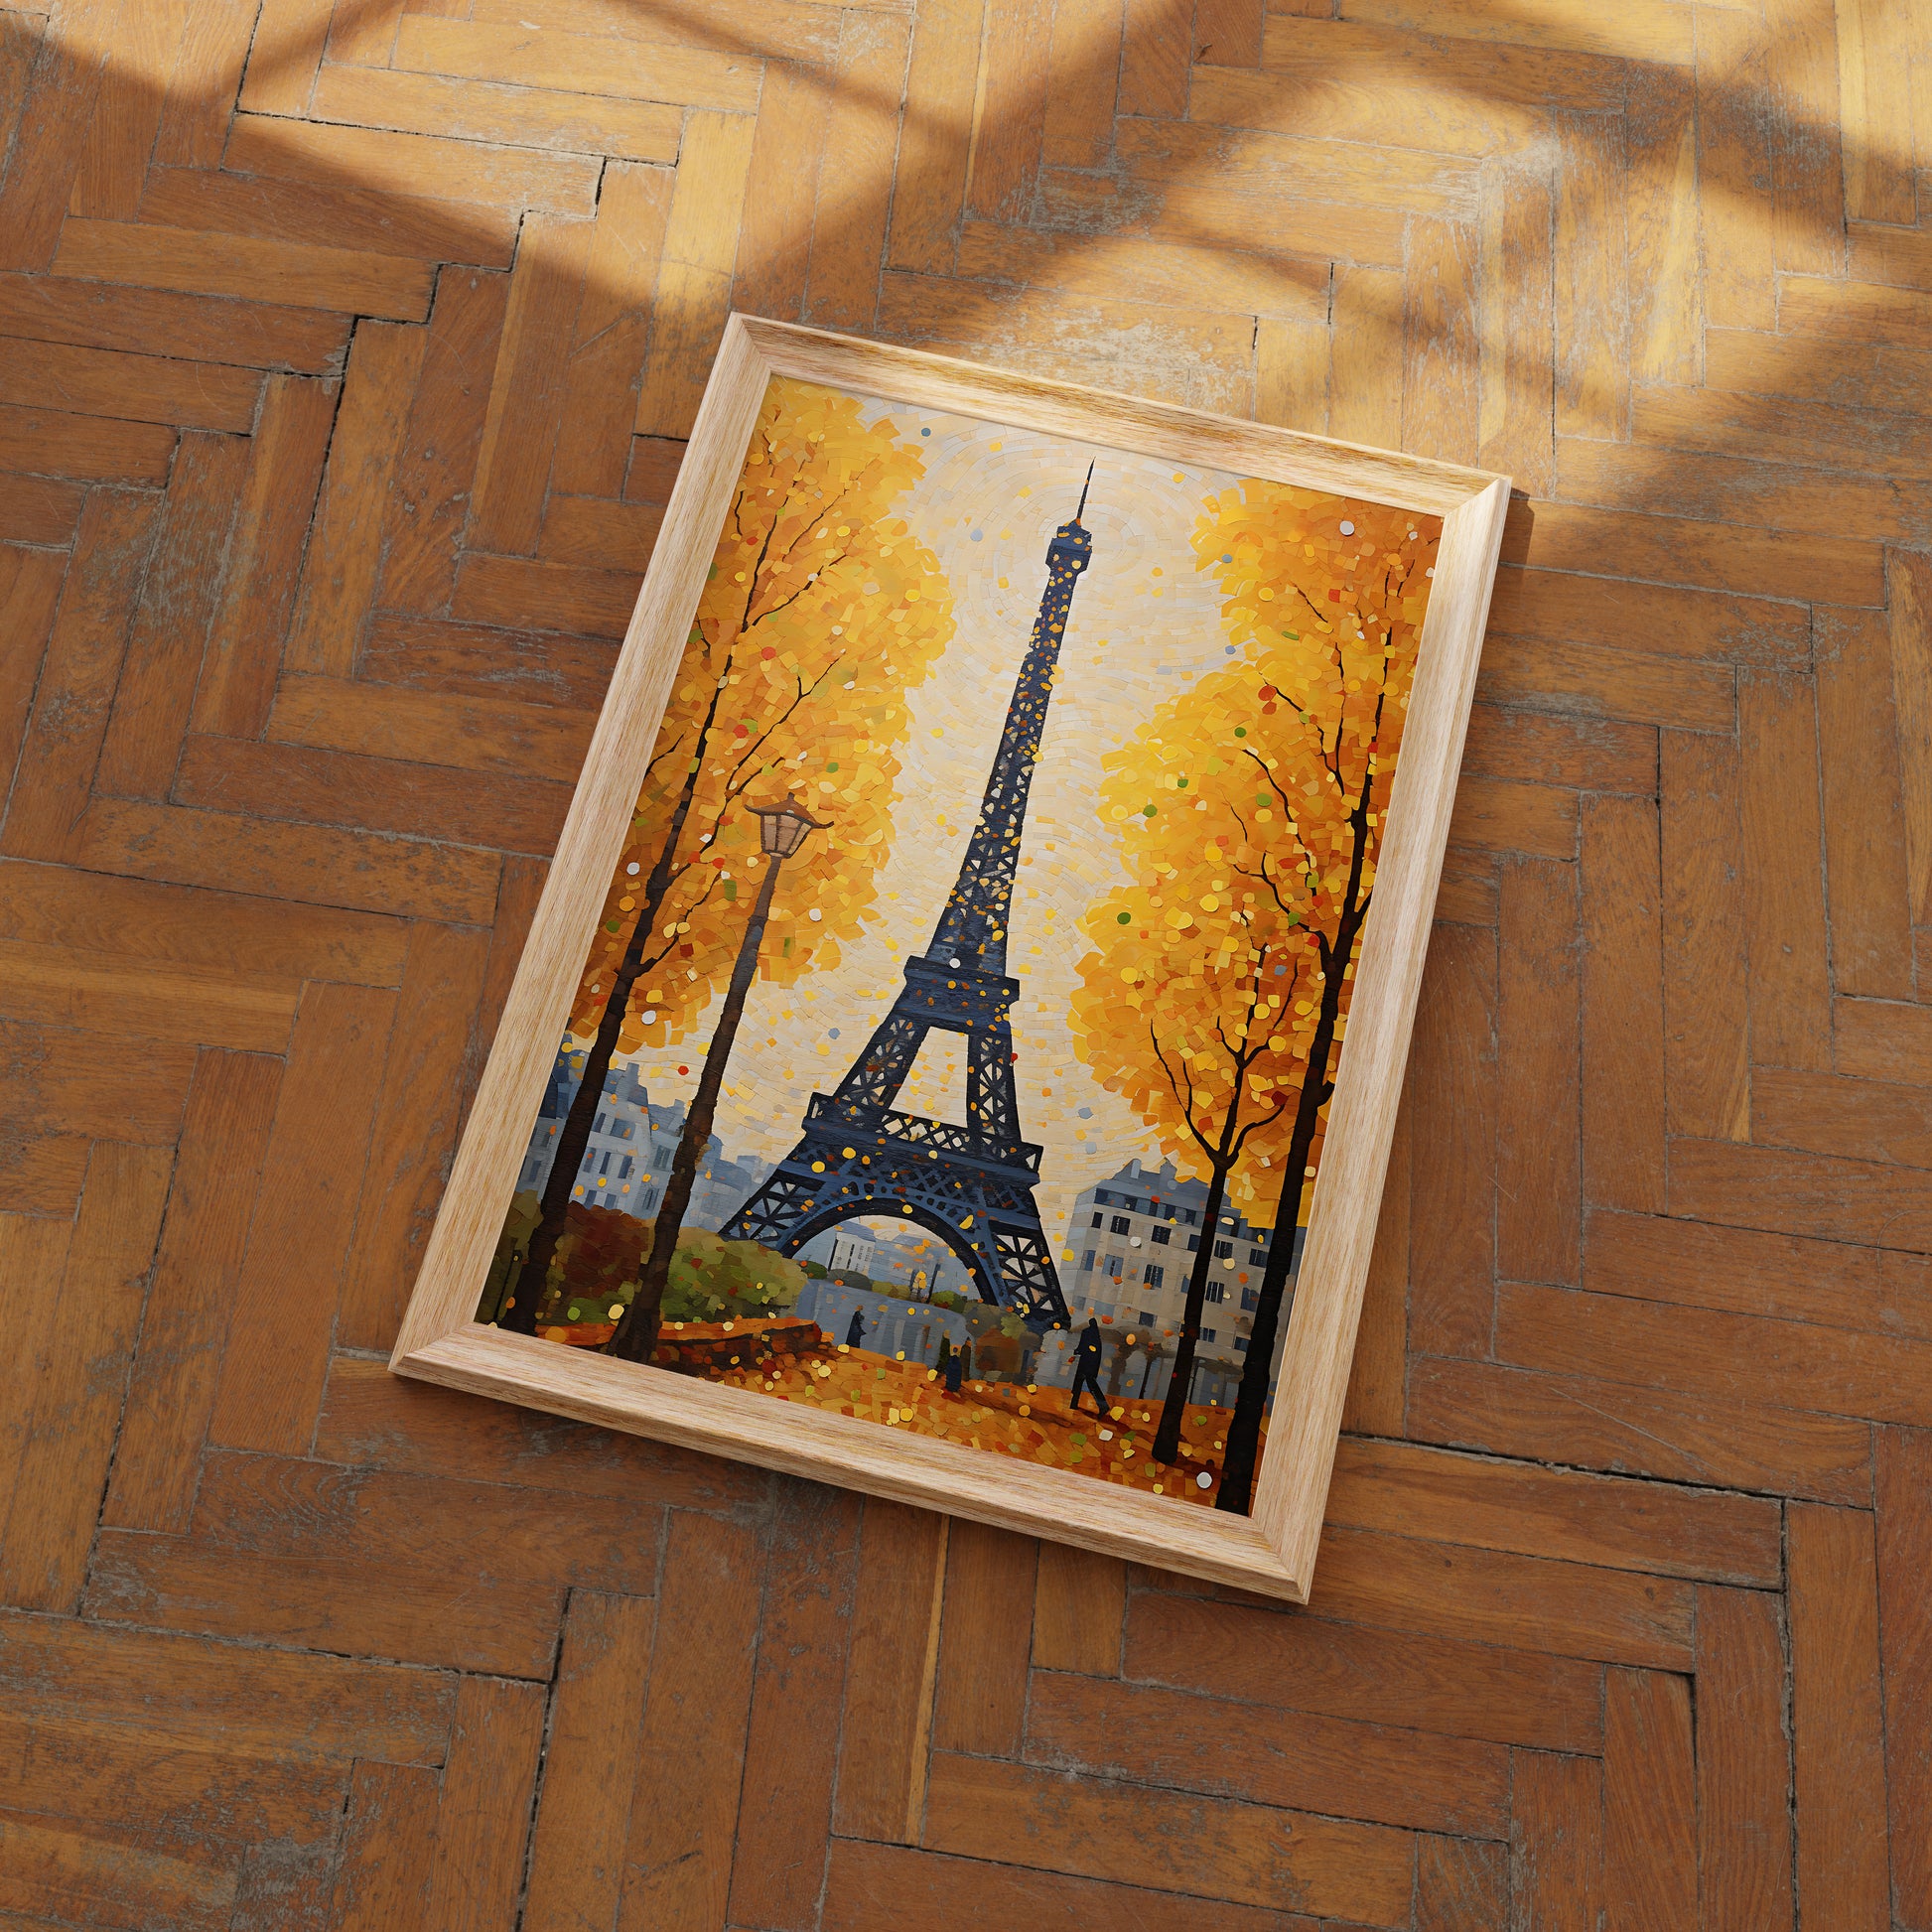 A framed painting of the Eiffel Tower with autumn trees on a herringbone wood floor.